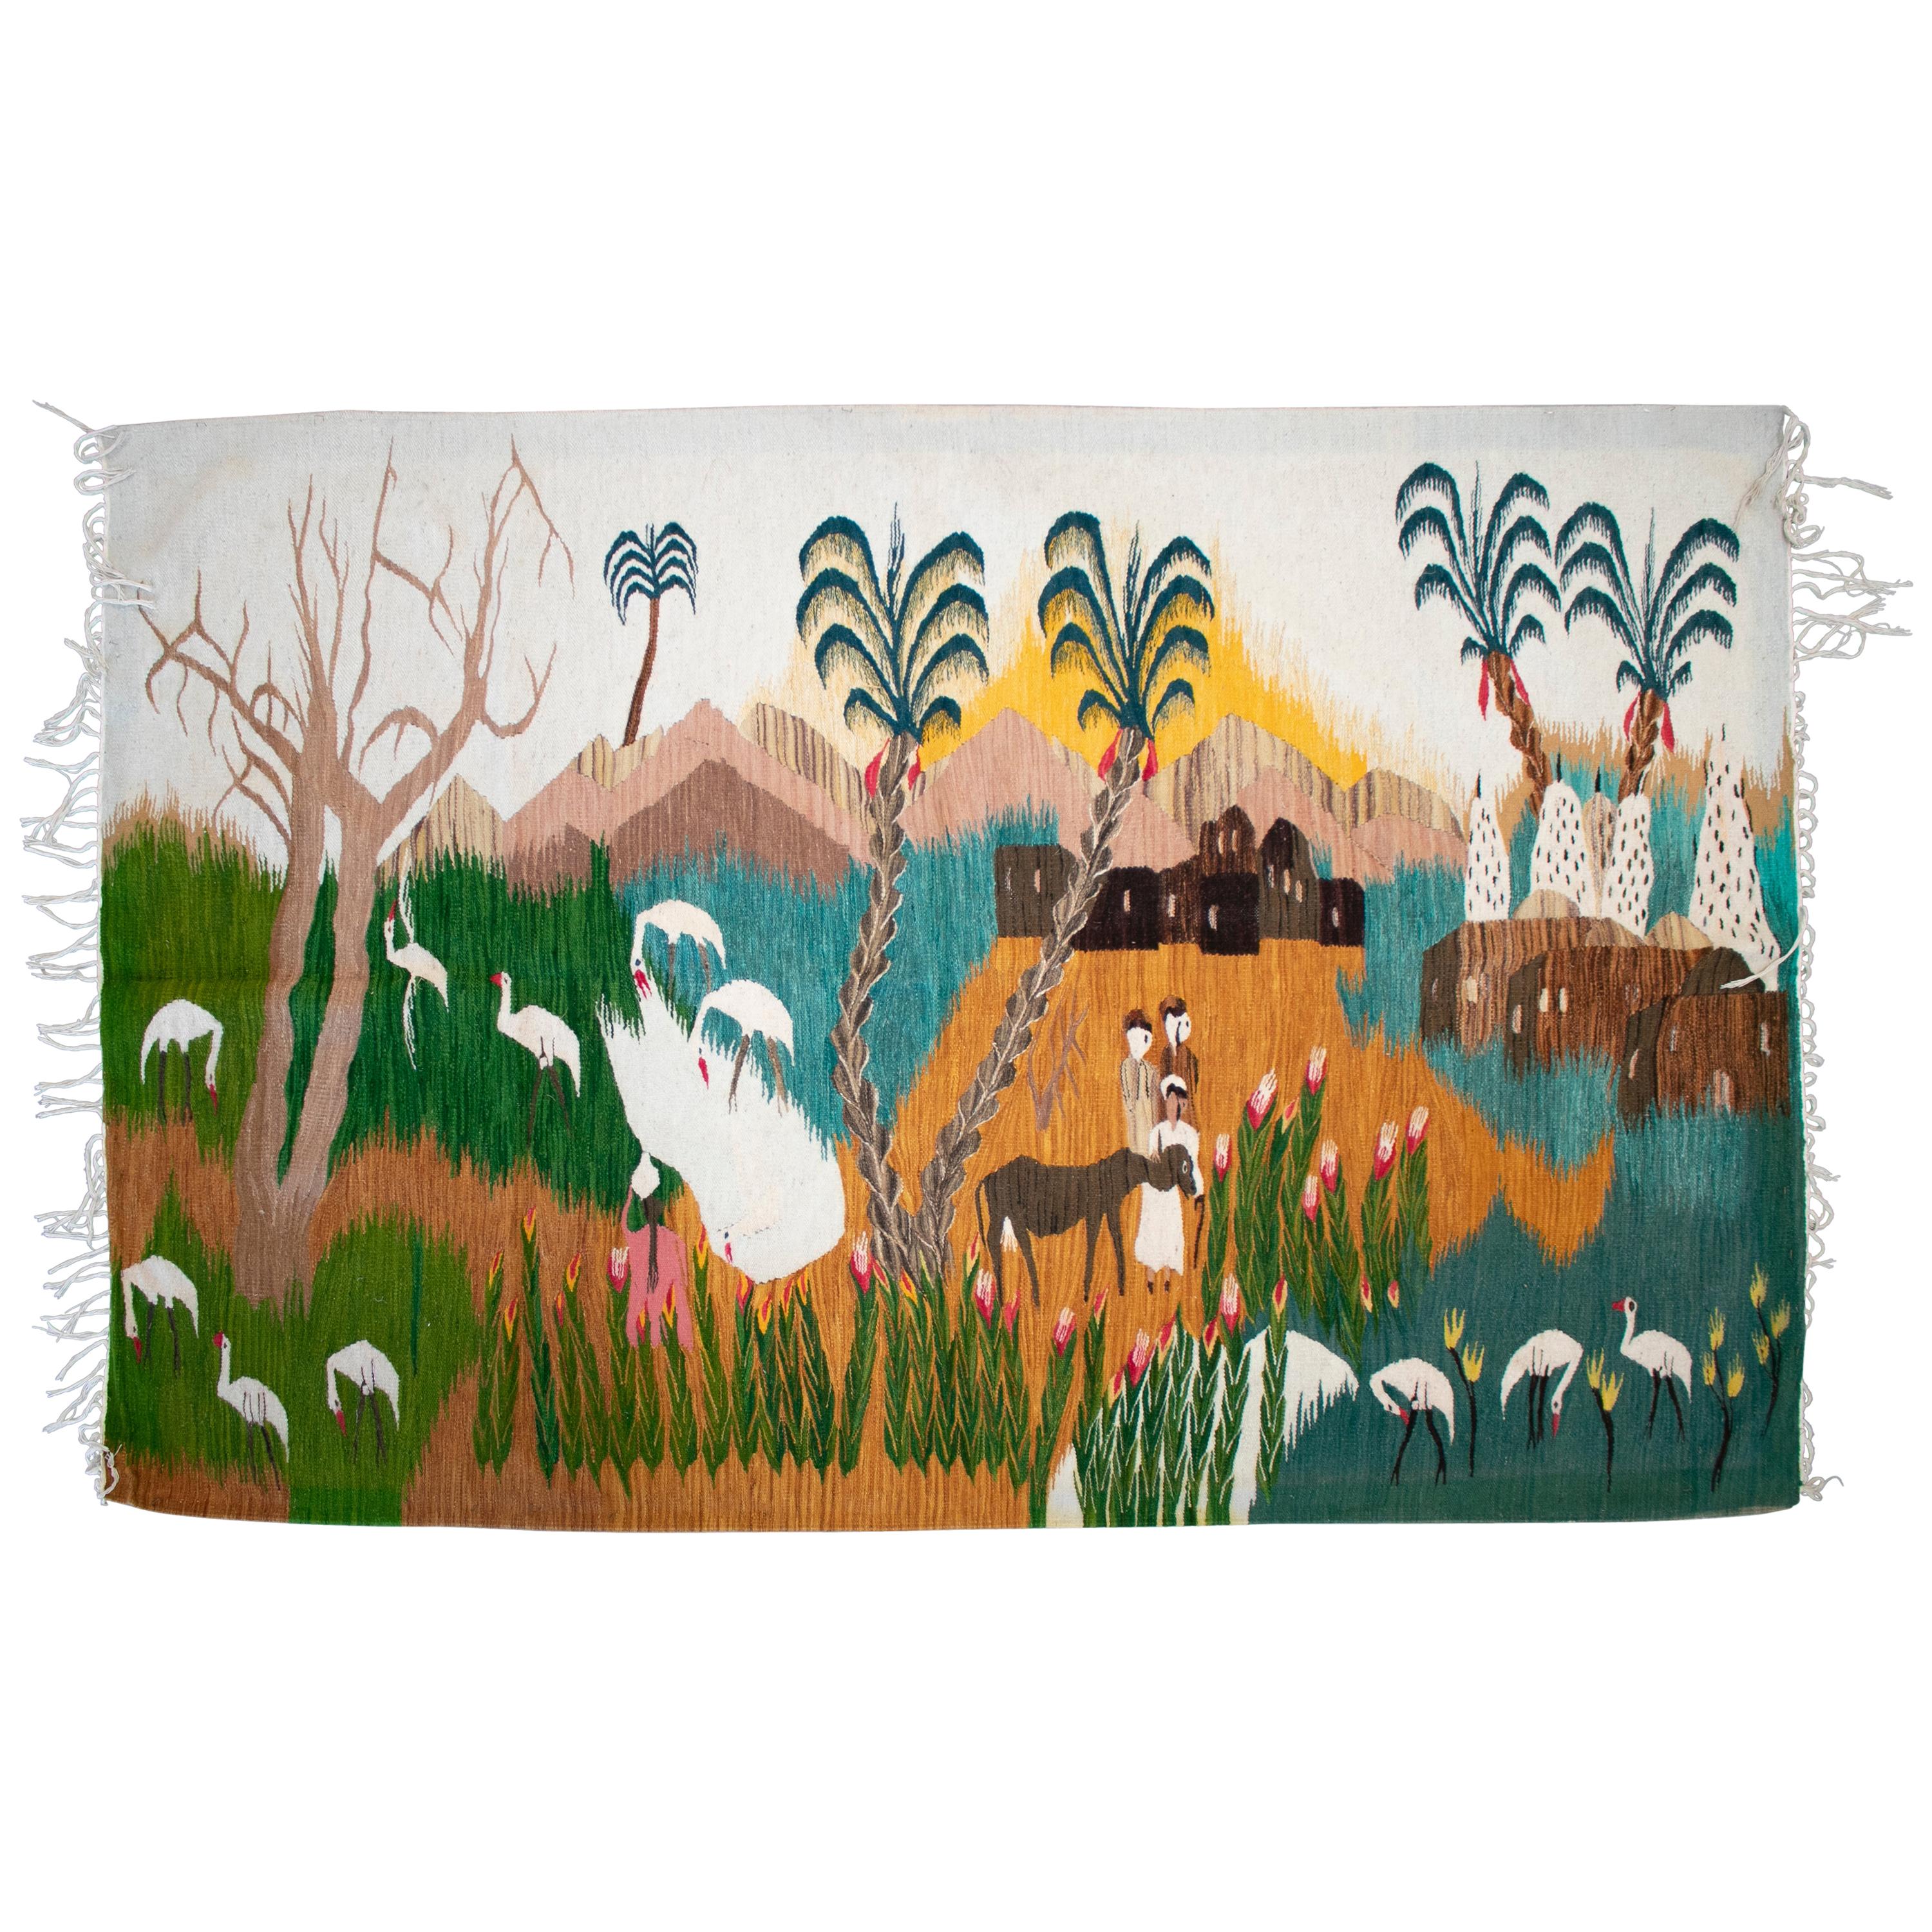 1930s Tapestry with Nile Animal and Palm Tree Scenery